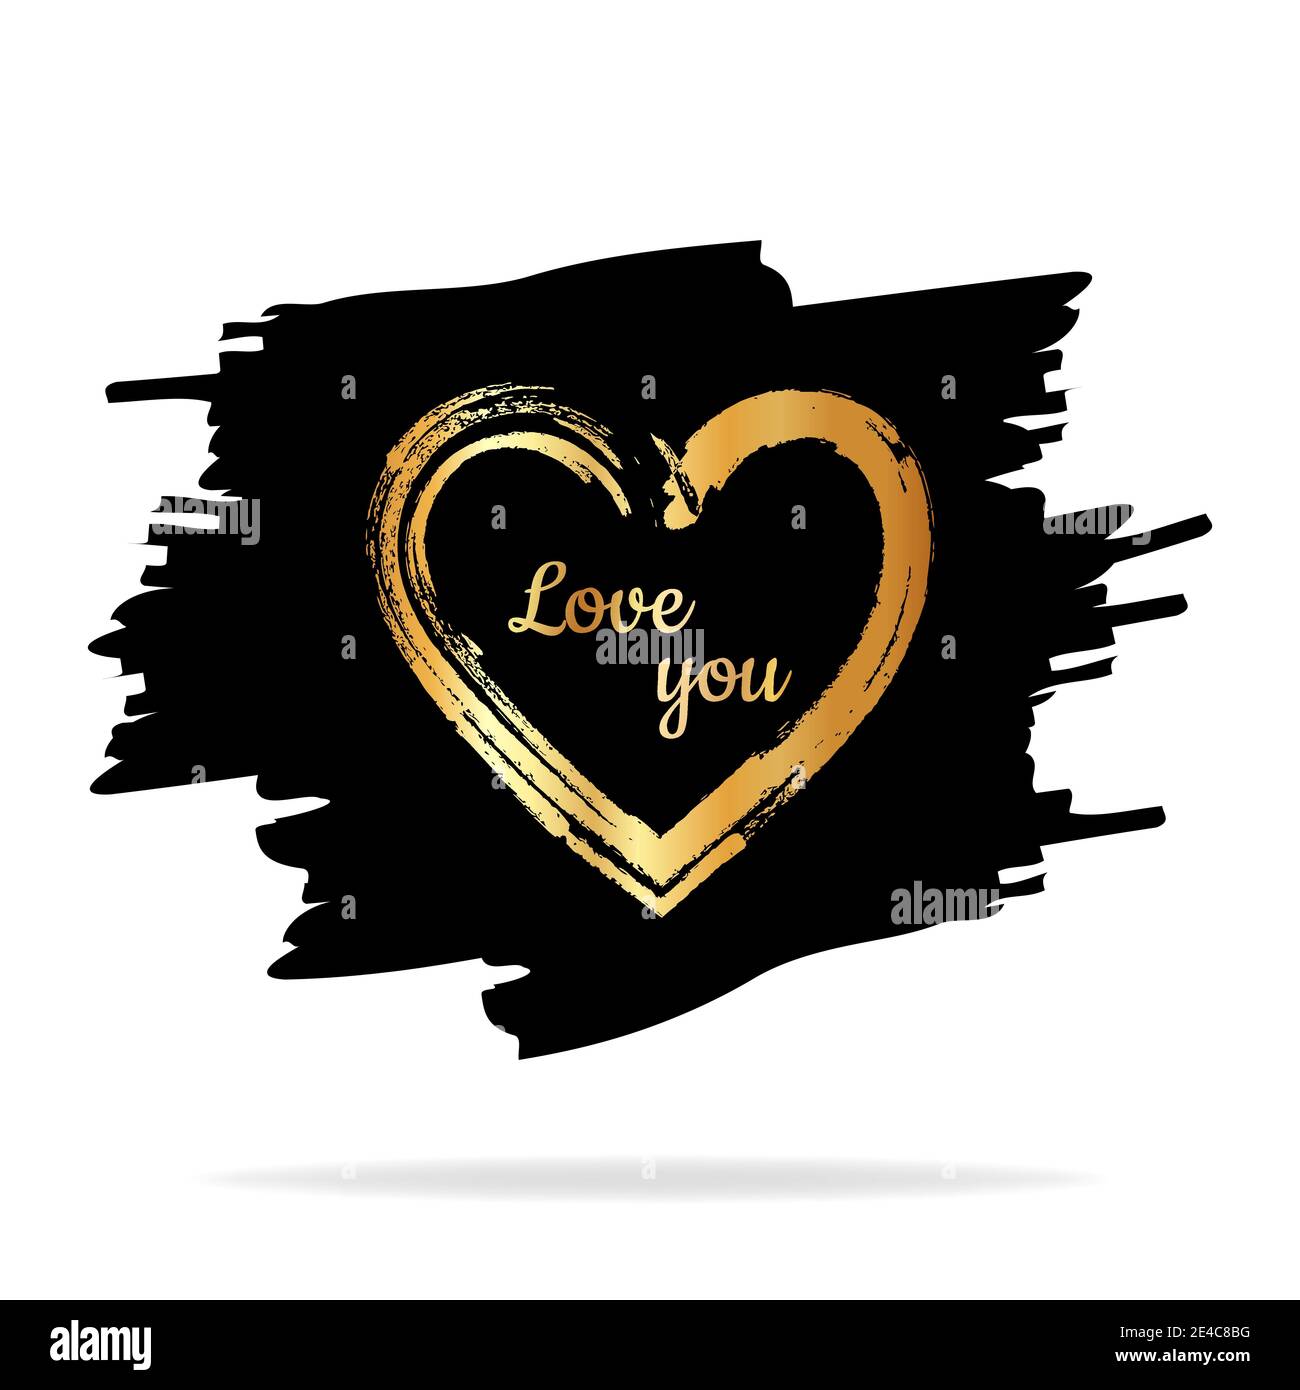 Gold Hearts. Hand drawn hearts brushes. Hand painted heart shape. Symbol of love Valentine's Day wedding cards. Vector illustration Stock Vector